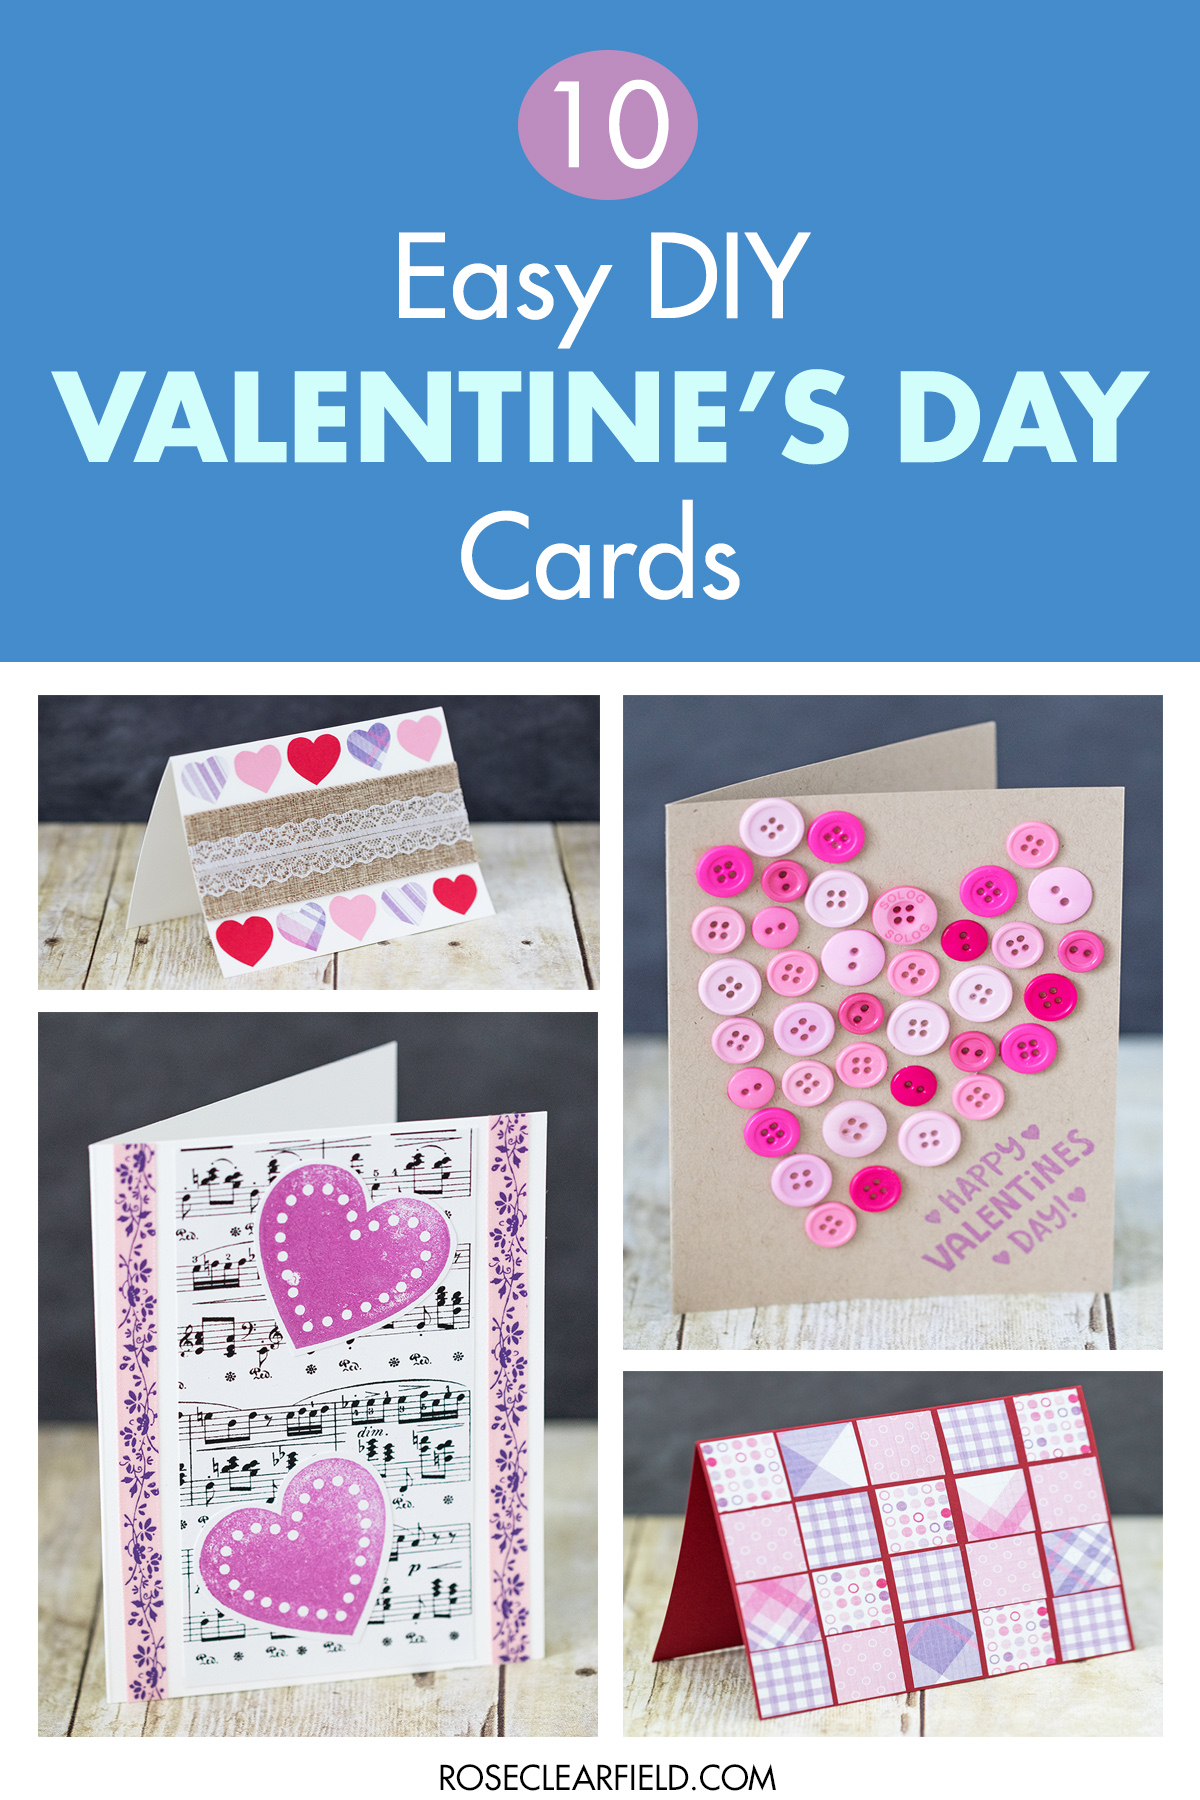 10-simple-diy-valentine-s-day-cards-rose-clearfield